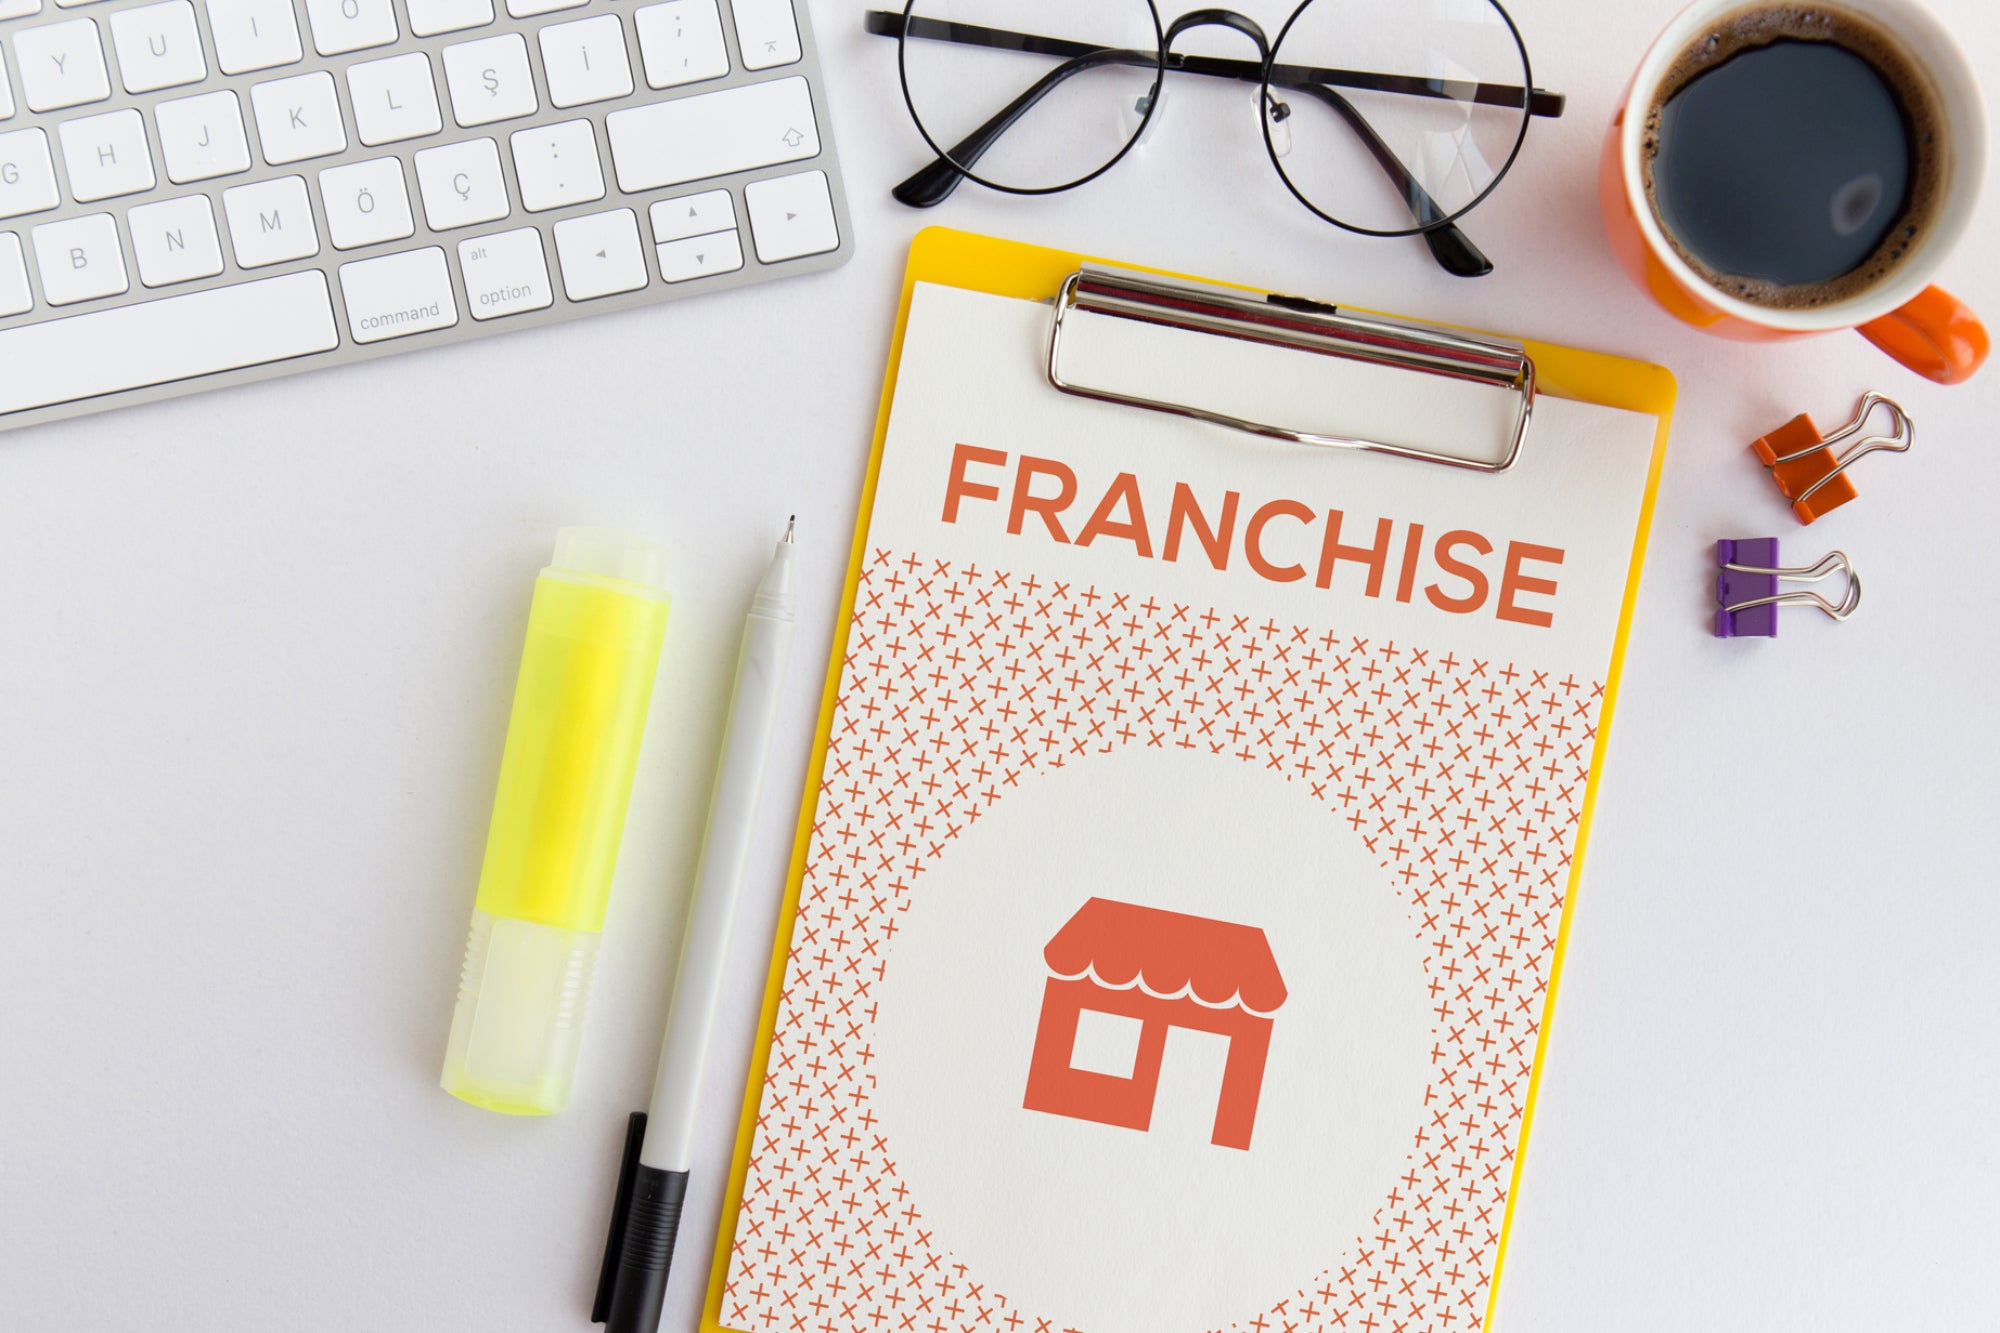 5 Steps to Becoming a Franchise Owner